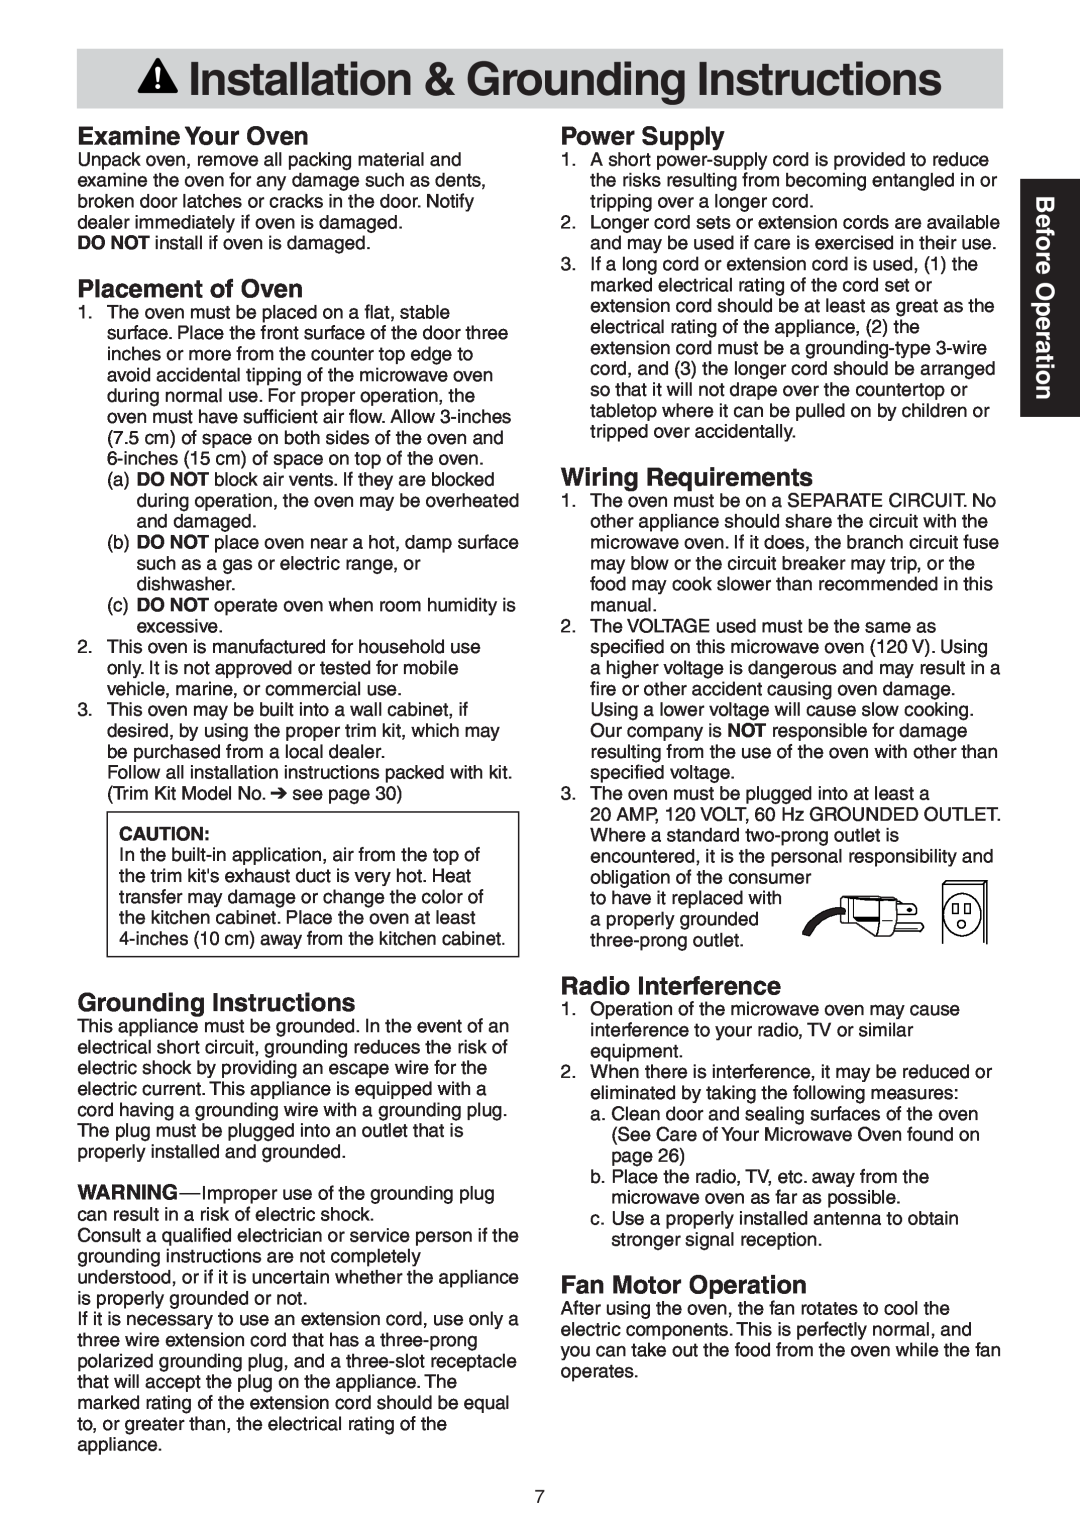 Panasonic NN-CD989S manual Installation & Grounding Instructions, Examine Your Oven, Placement of Oven, Power Supply 